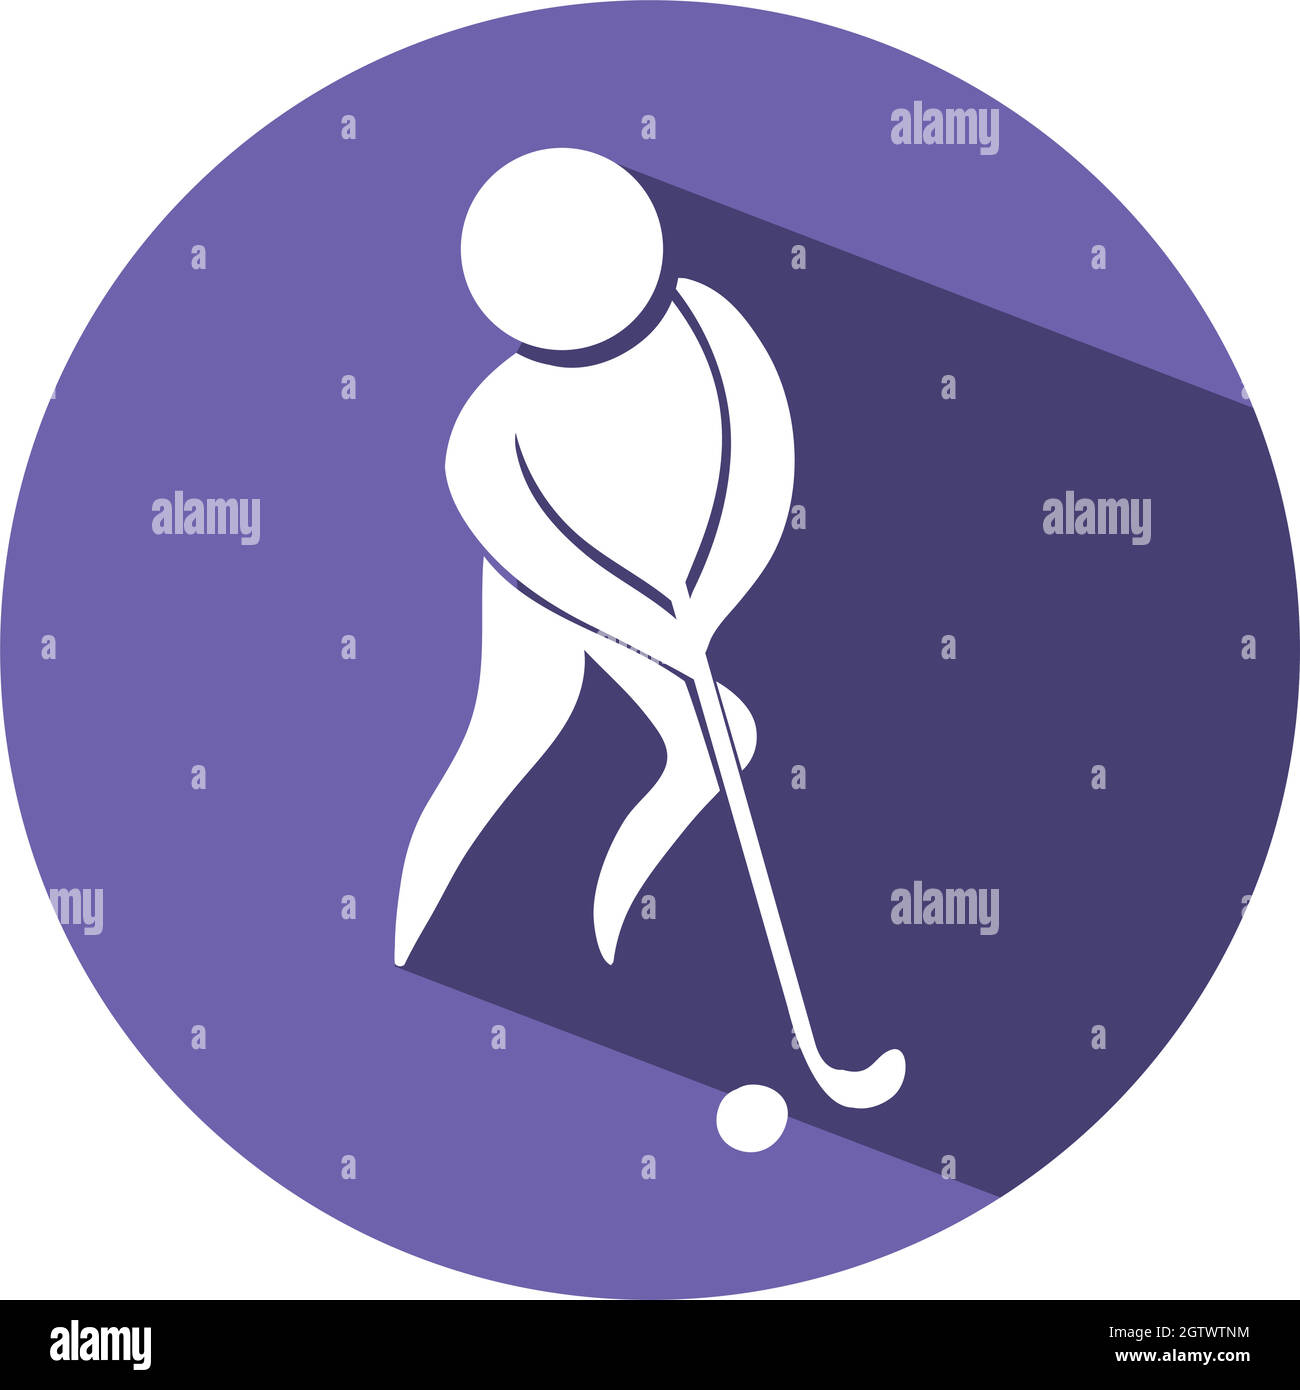 Sport icon design for ground hockey on round tag Stock Vector